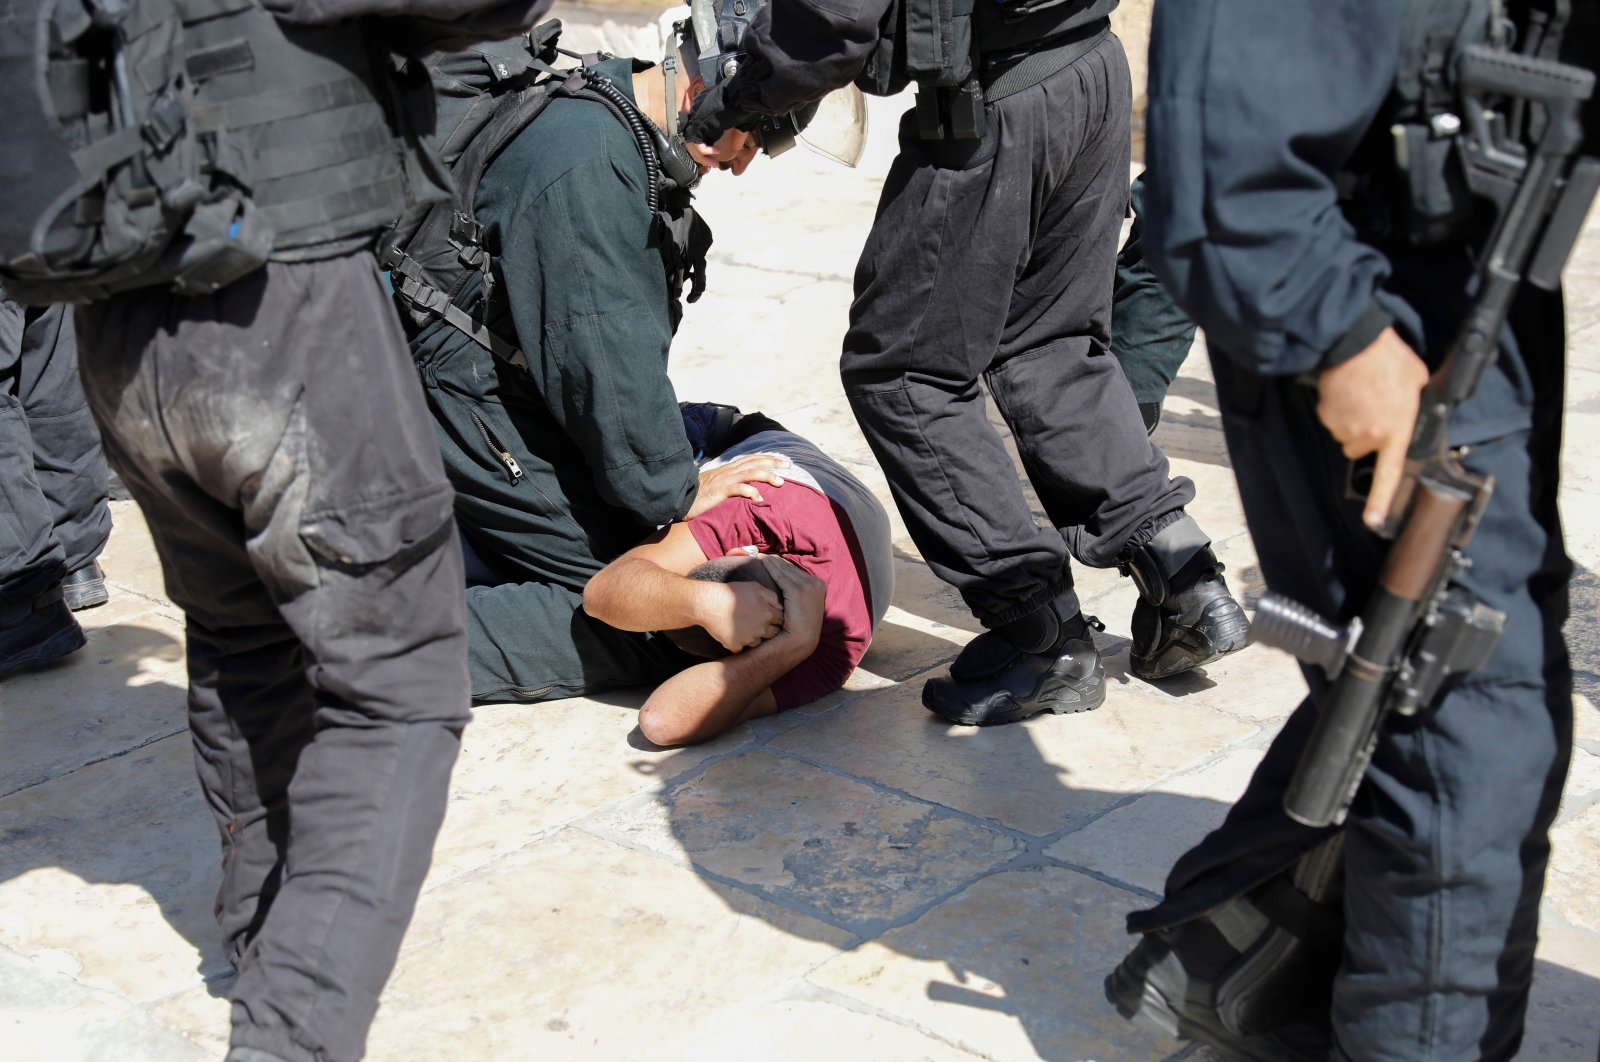 Israeli security forces detain a Palestinian at the Al-Aqsa Mosque compound in the Old City of Jerusalem, Israel, Aug. 11, 2019. (AFP Photo)